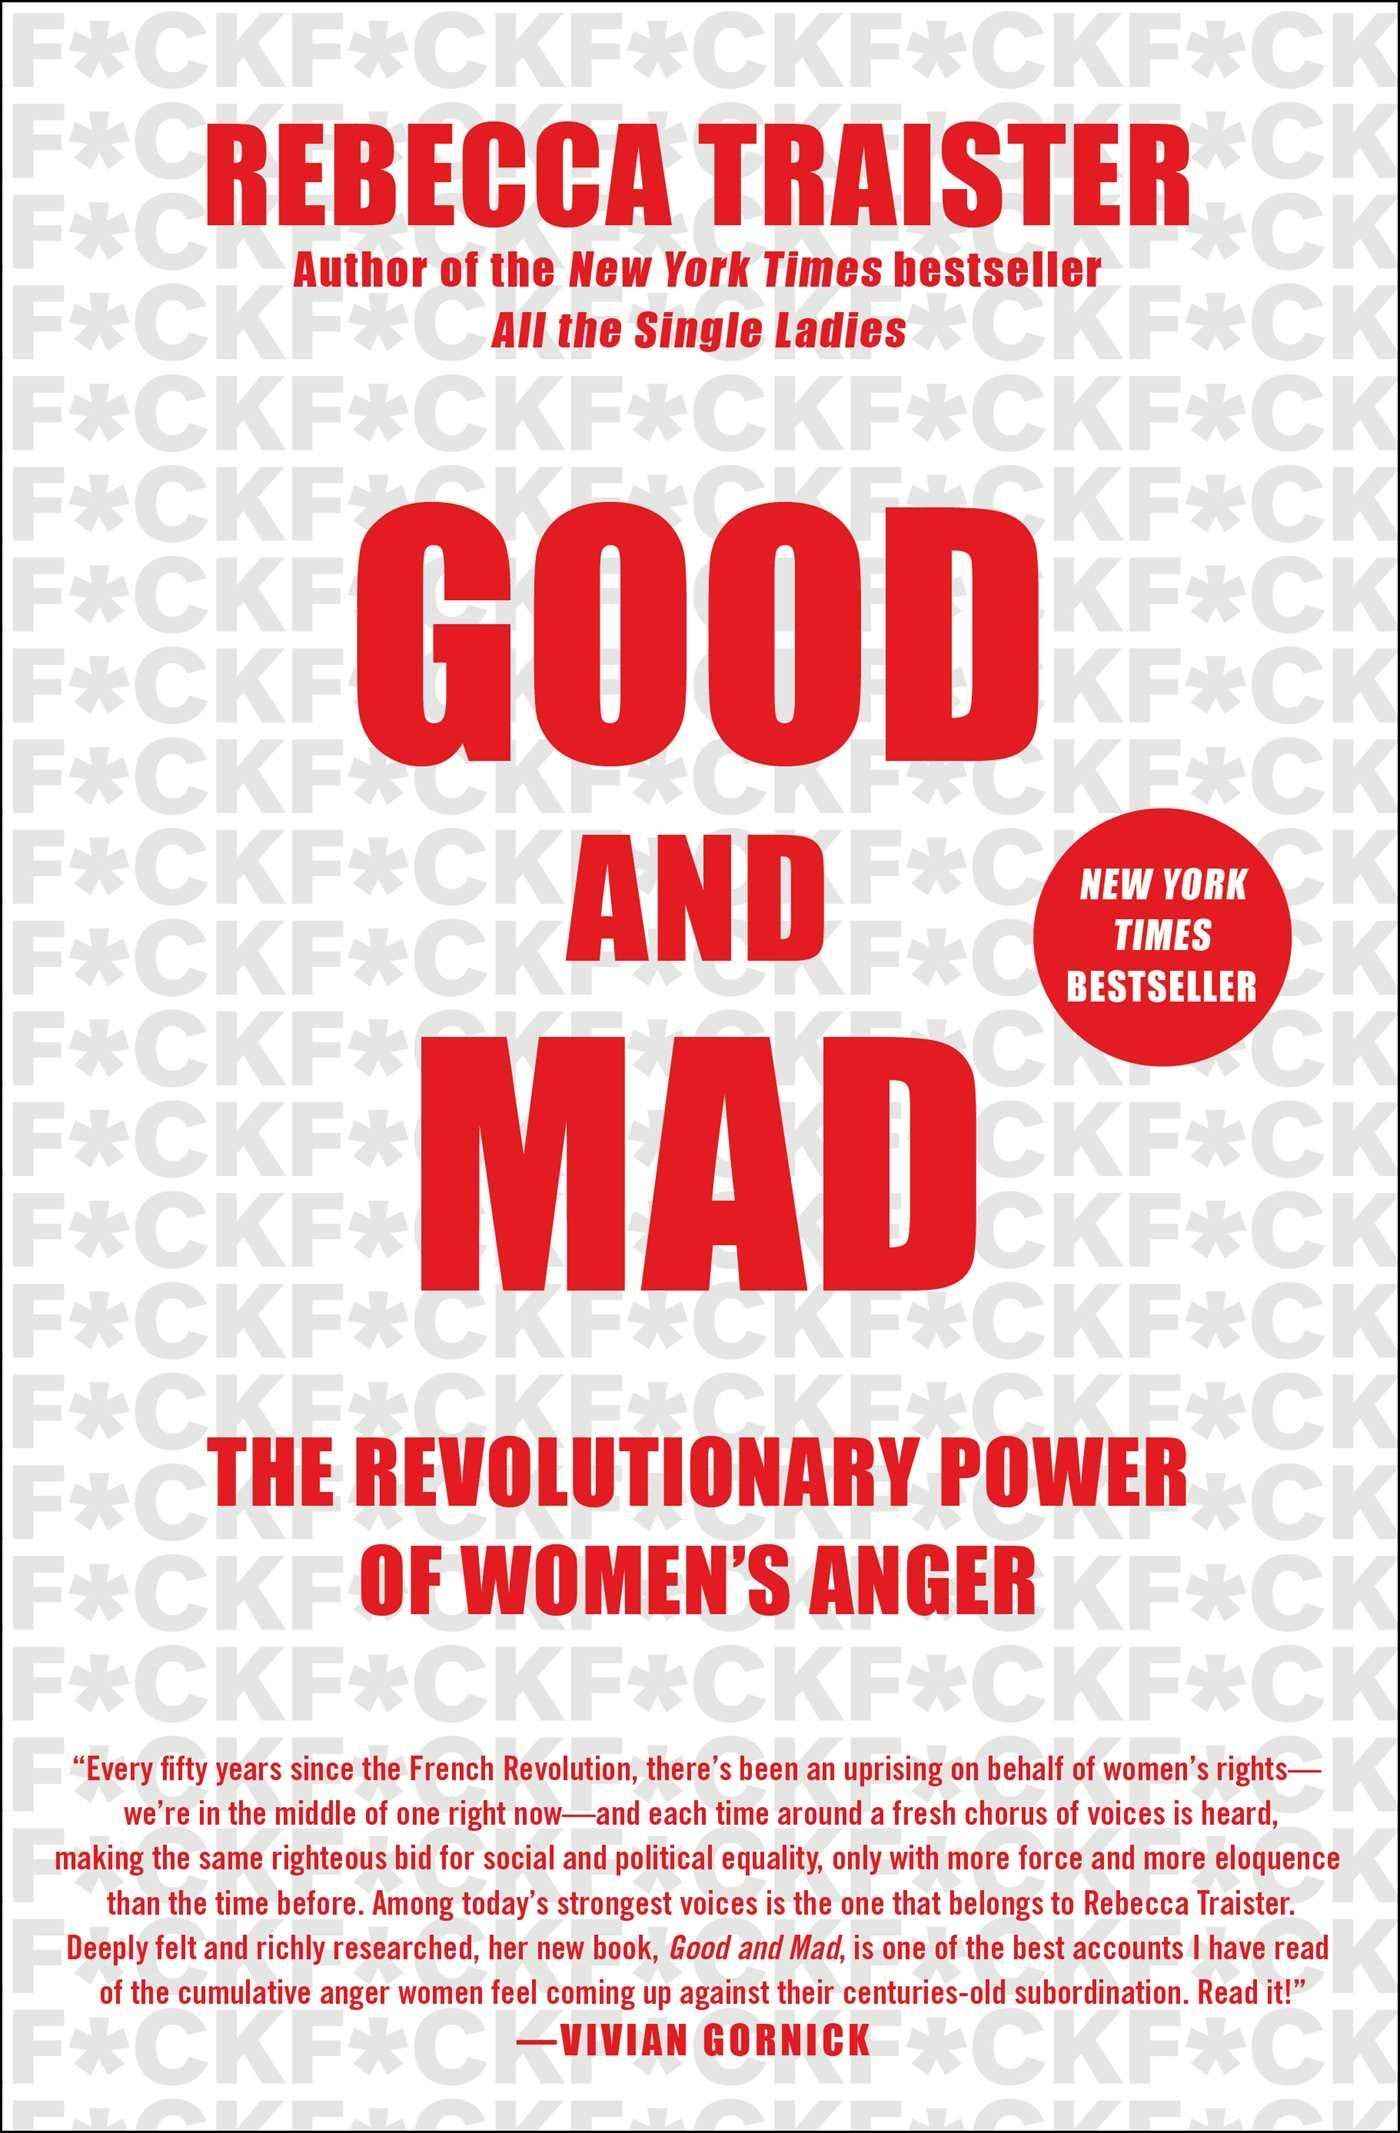 Anger Persists: On Rebecca Traister’s “Good and Mad: The Revolutionary Power of Women’s Anger”